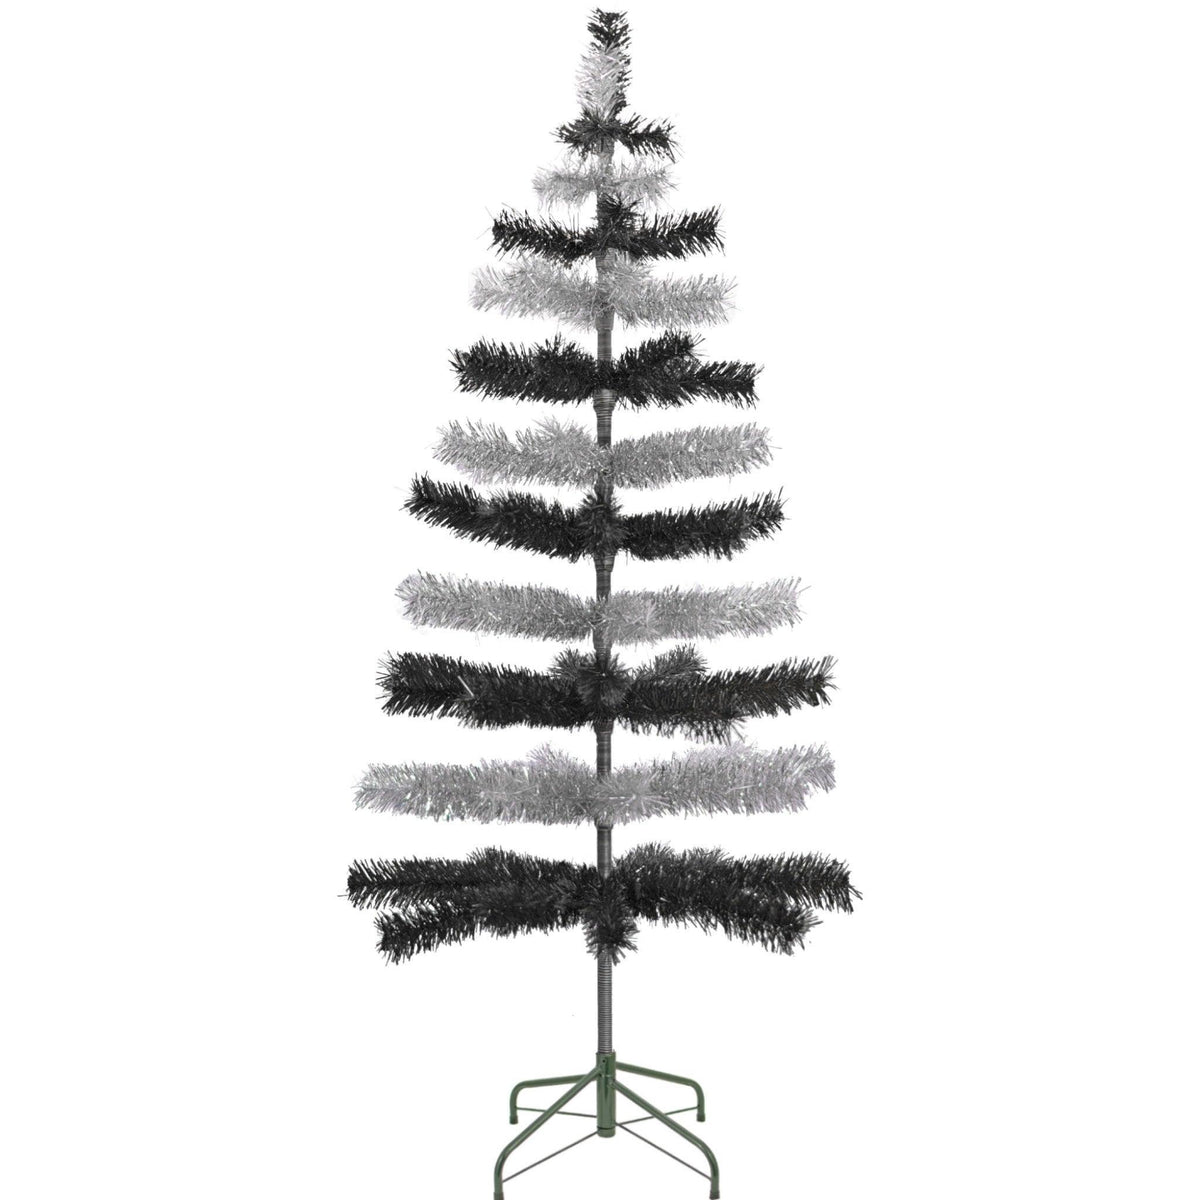 Black & Silver Layered Tinsel Christmas Trees! Decorate for the holidays with a Shiny Black and Metallic Silver retro-style Christmas Tree. On sale now at leedisplay.com